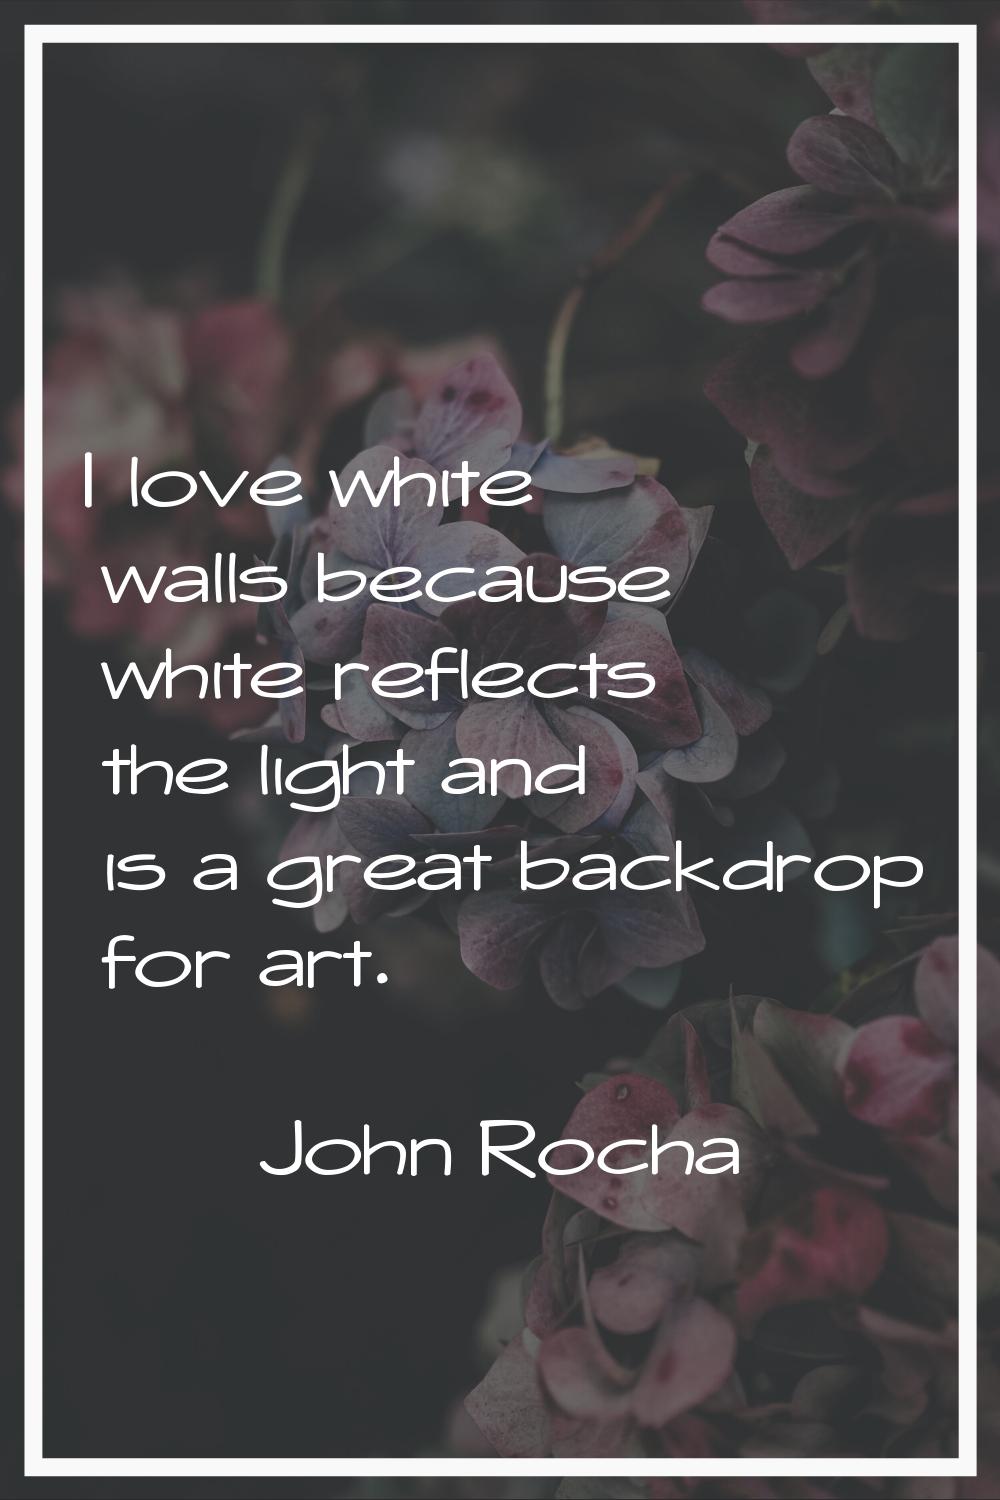 I love white walls because white reflects the light and is a great backdrop for art.